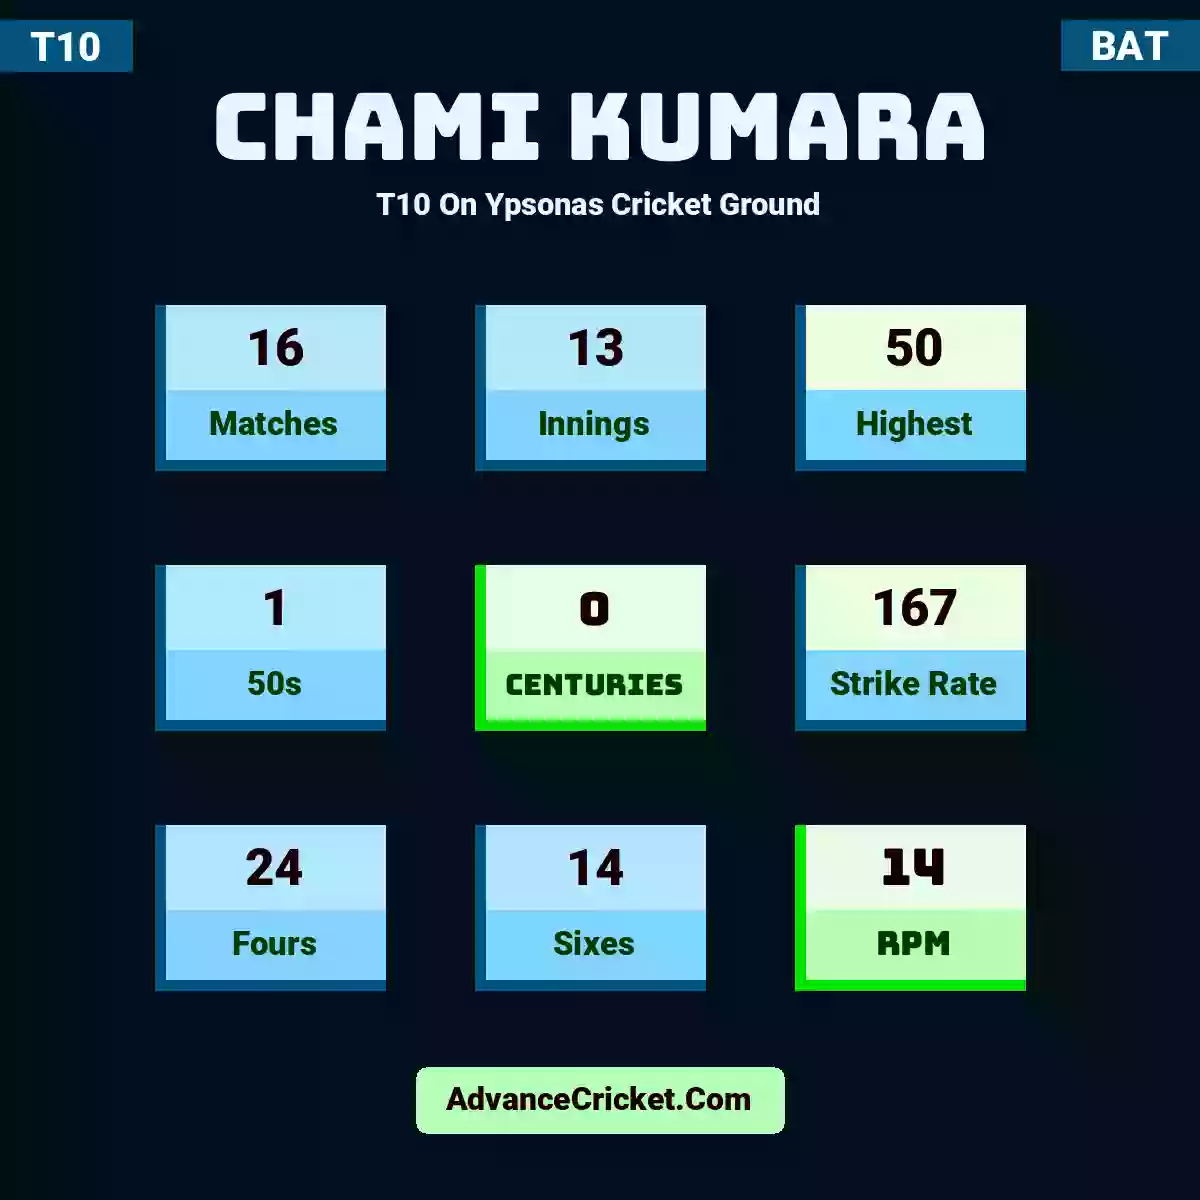 Chami Kumara T10  On Ypsonas Cricket Ground, Chami Kumara played 16 matches, scored 50 runs as highest, 1 half-centuries, and 0 centuries, with a strike rate of 167. C.Kumara hit 24 fours and 14 sixes, with an RPM of 14.